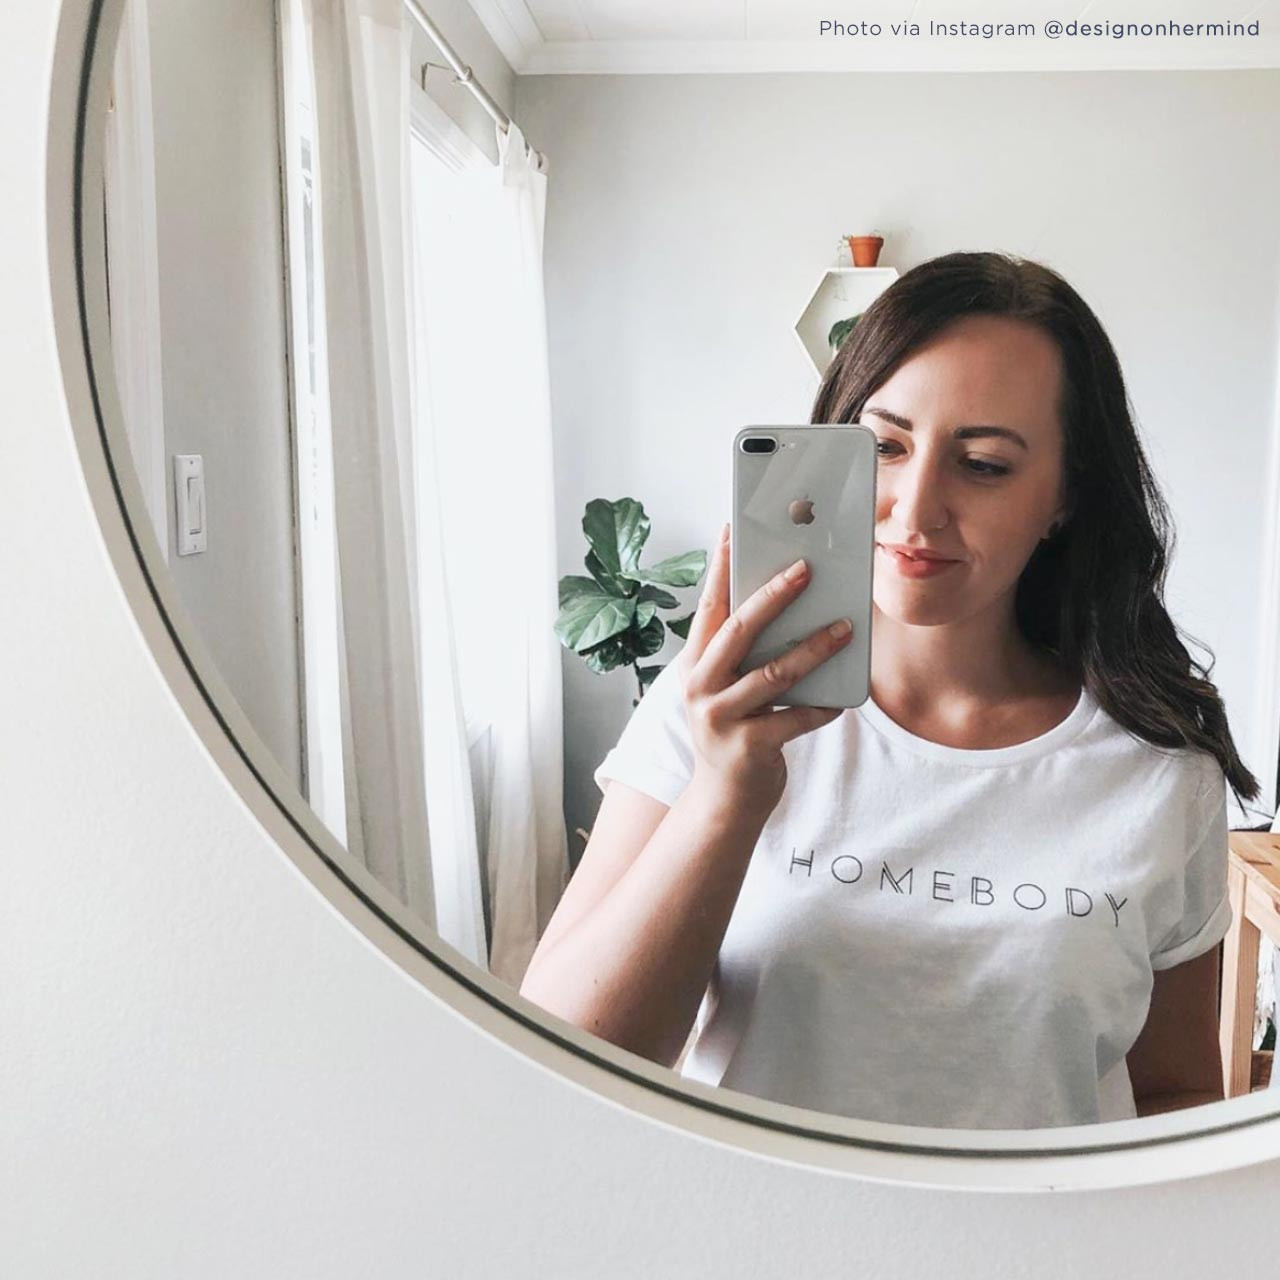 HOMEBODY Short-Sleeve T-Shirt (Black on White) from The Printed Home (Photo Credit: @designonhermind via Instagram)